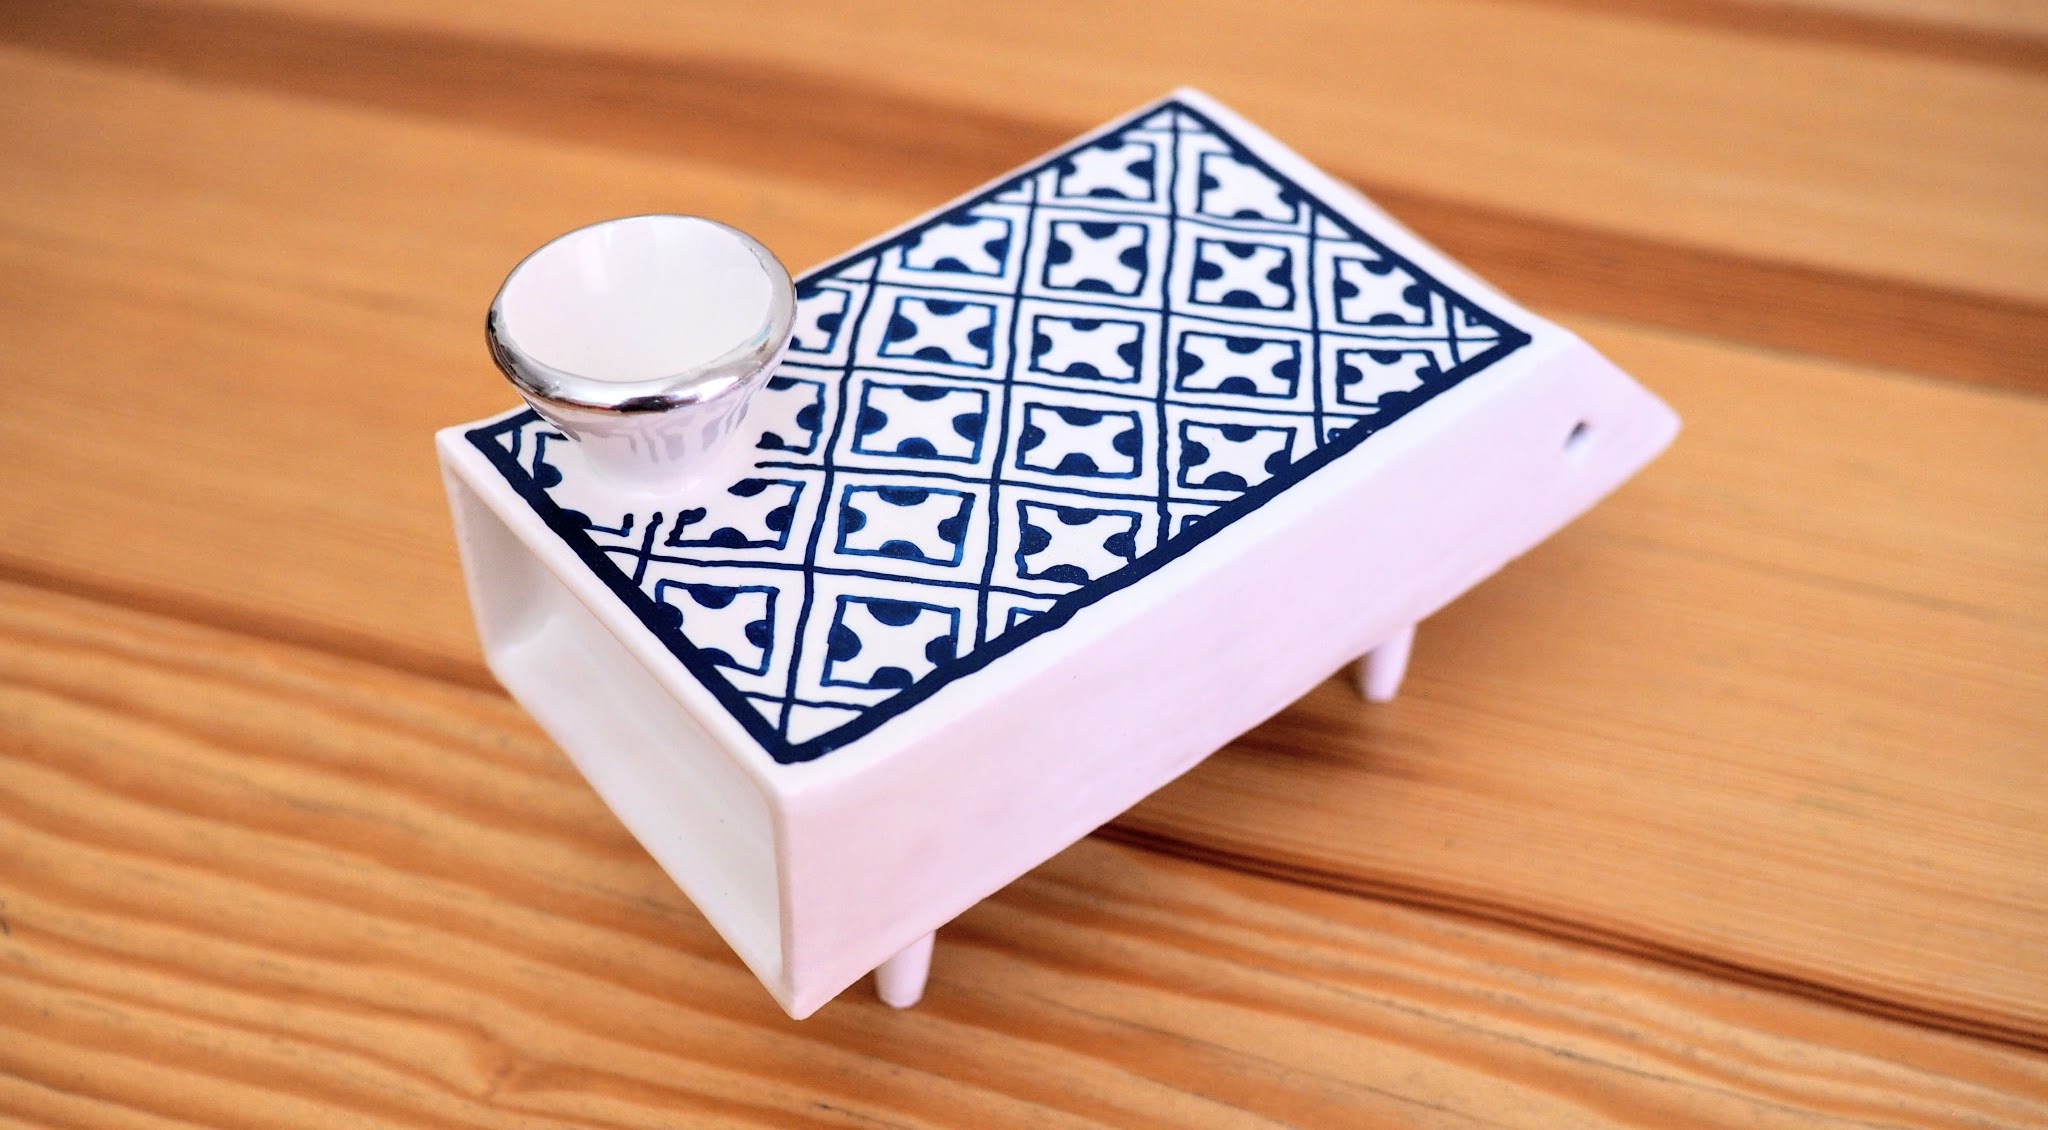 a poreclain box on four short legs, with blue checkered pattern and a porcelain cone on top